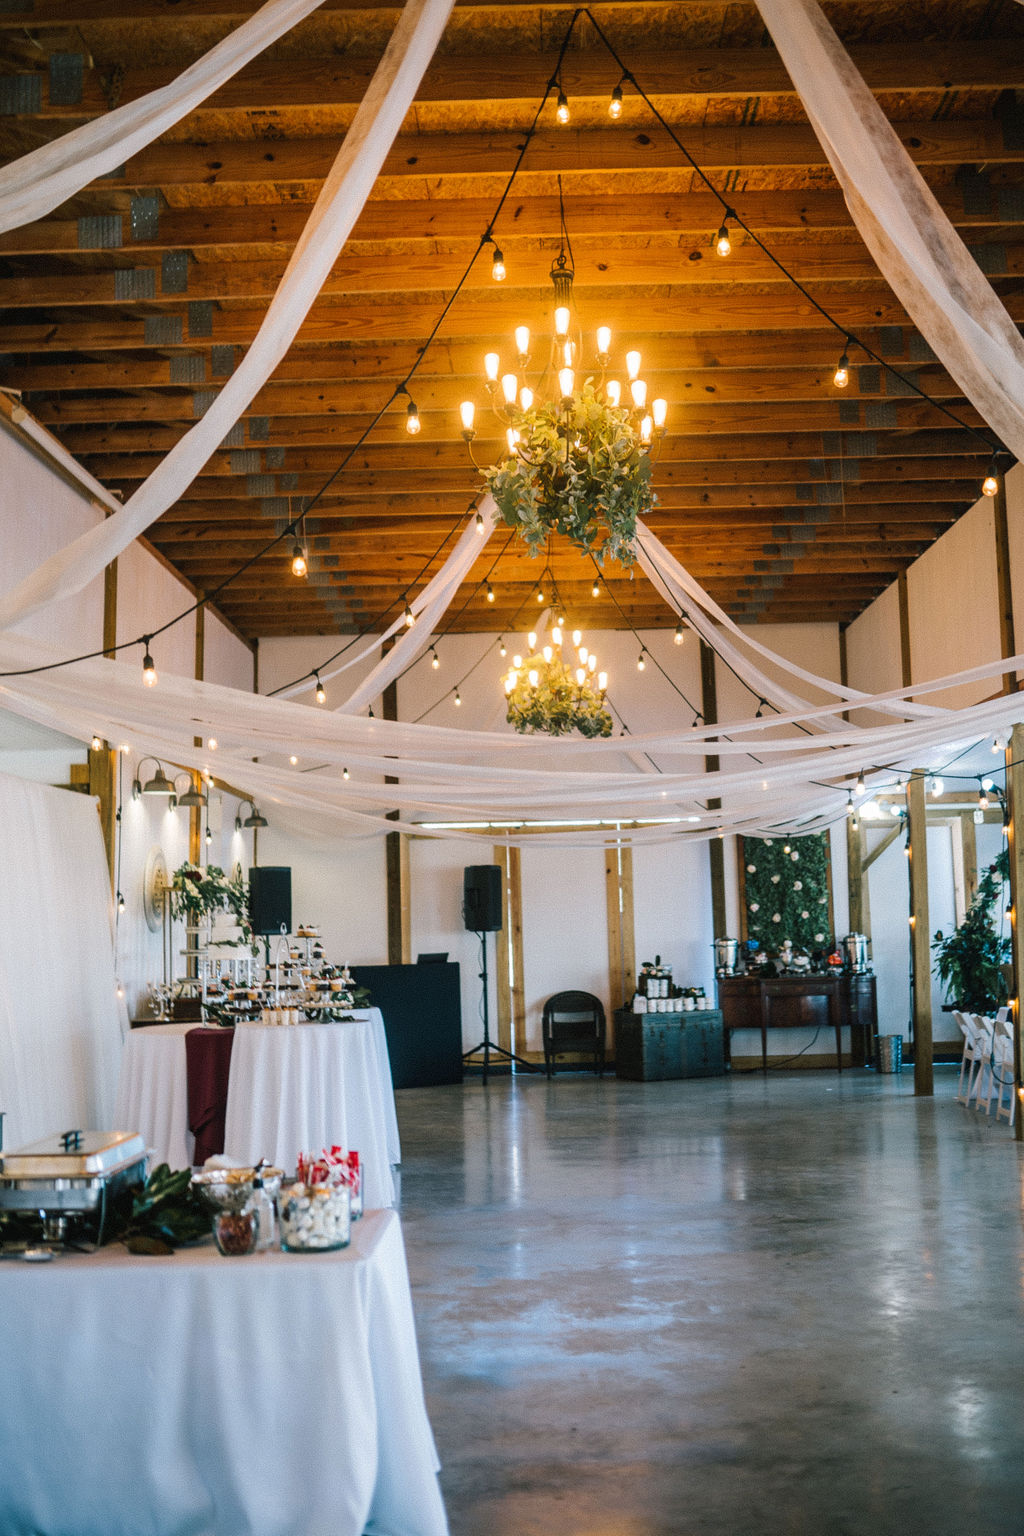 beautiful barn wedding venue in Knoxville Tennessee with wooden ceiling and chandeliers decorated with draped fabric and Edison bulb strings of lights